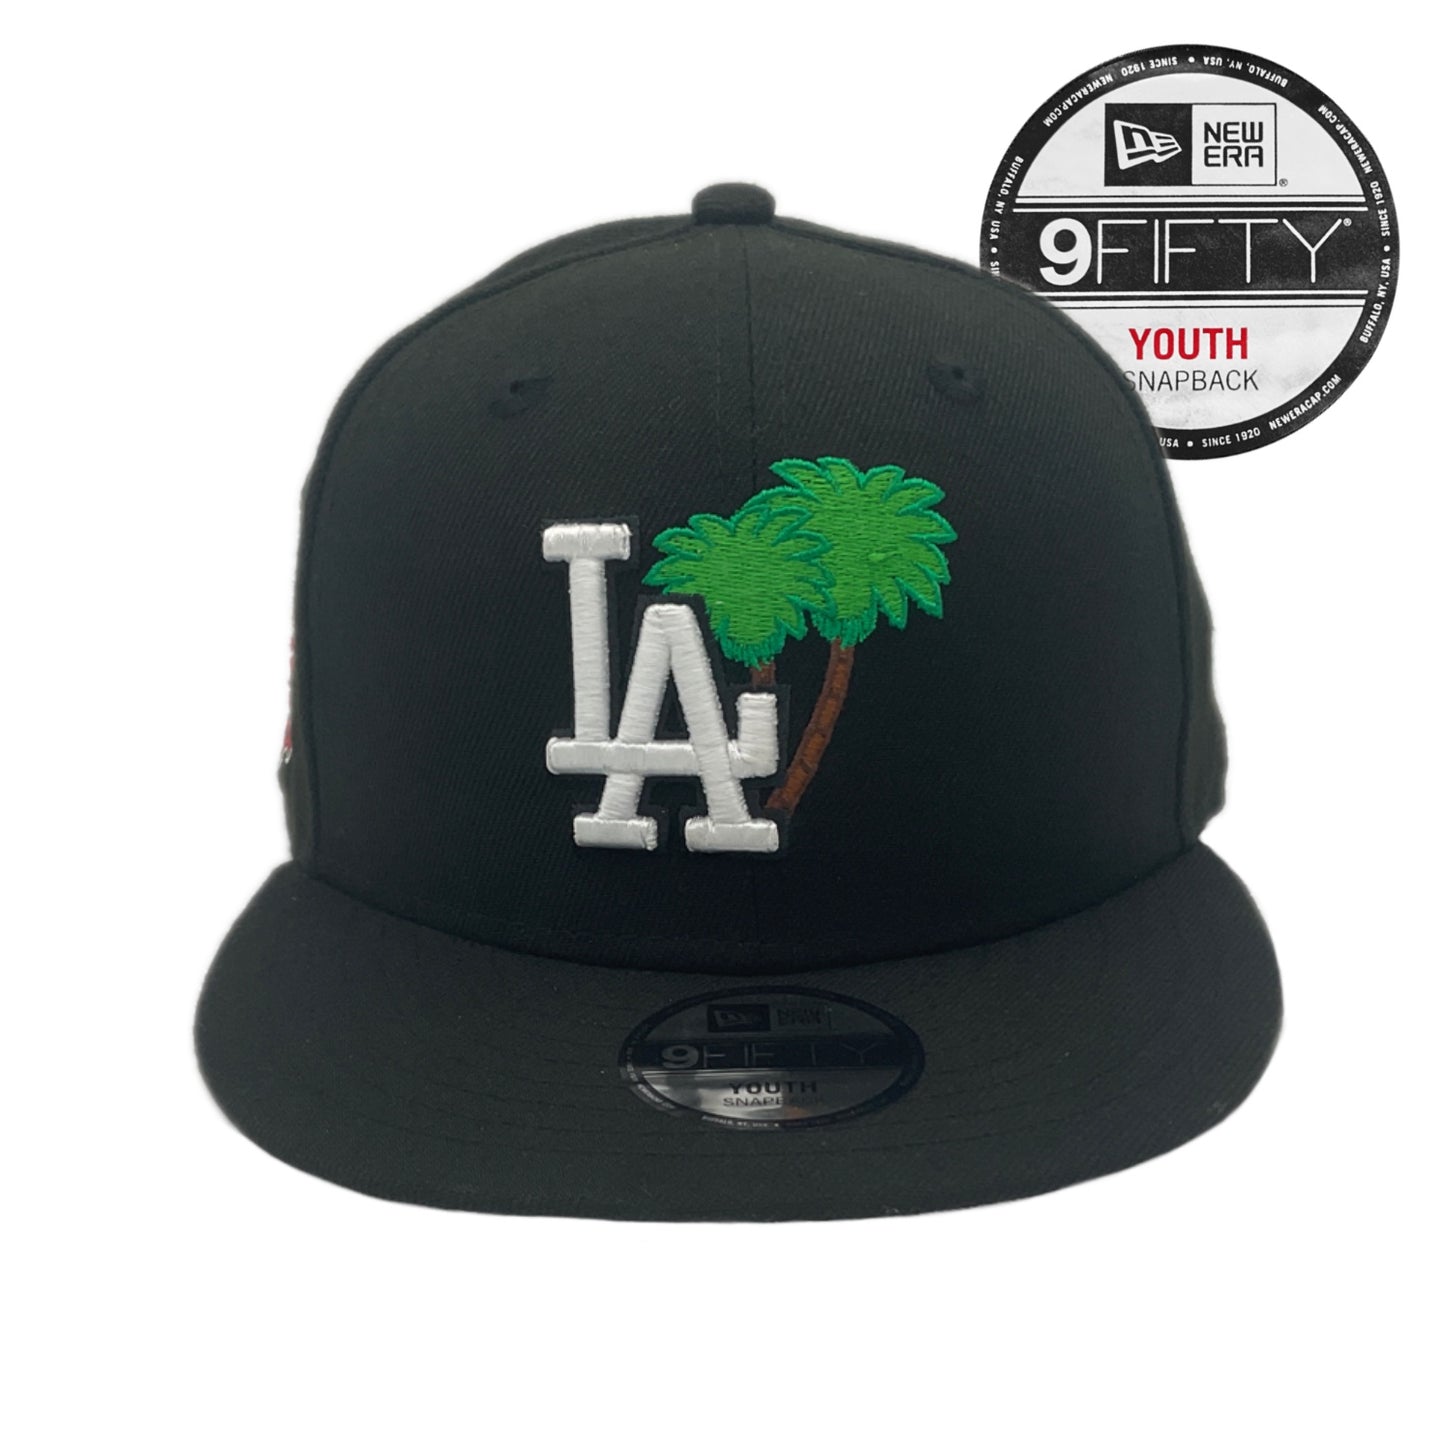 Los Angeles Dodgers Cooperstown 9Fifty YOUTH New Era Snap Back Black